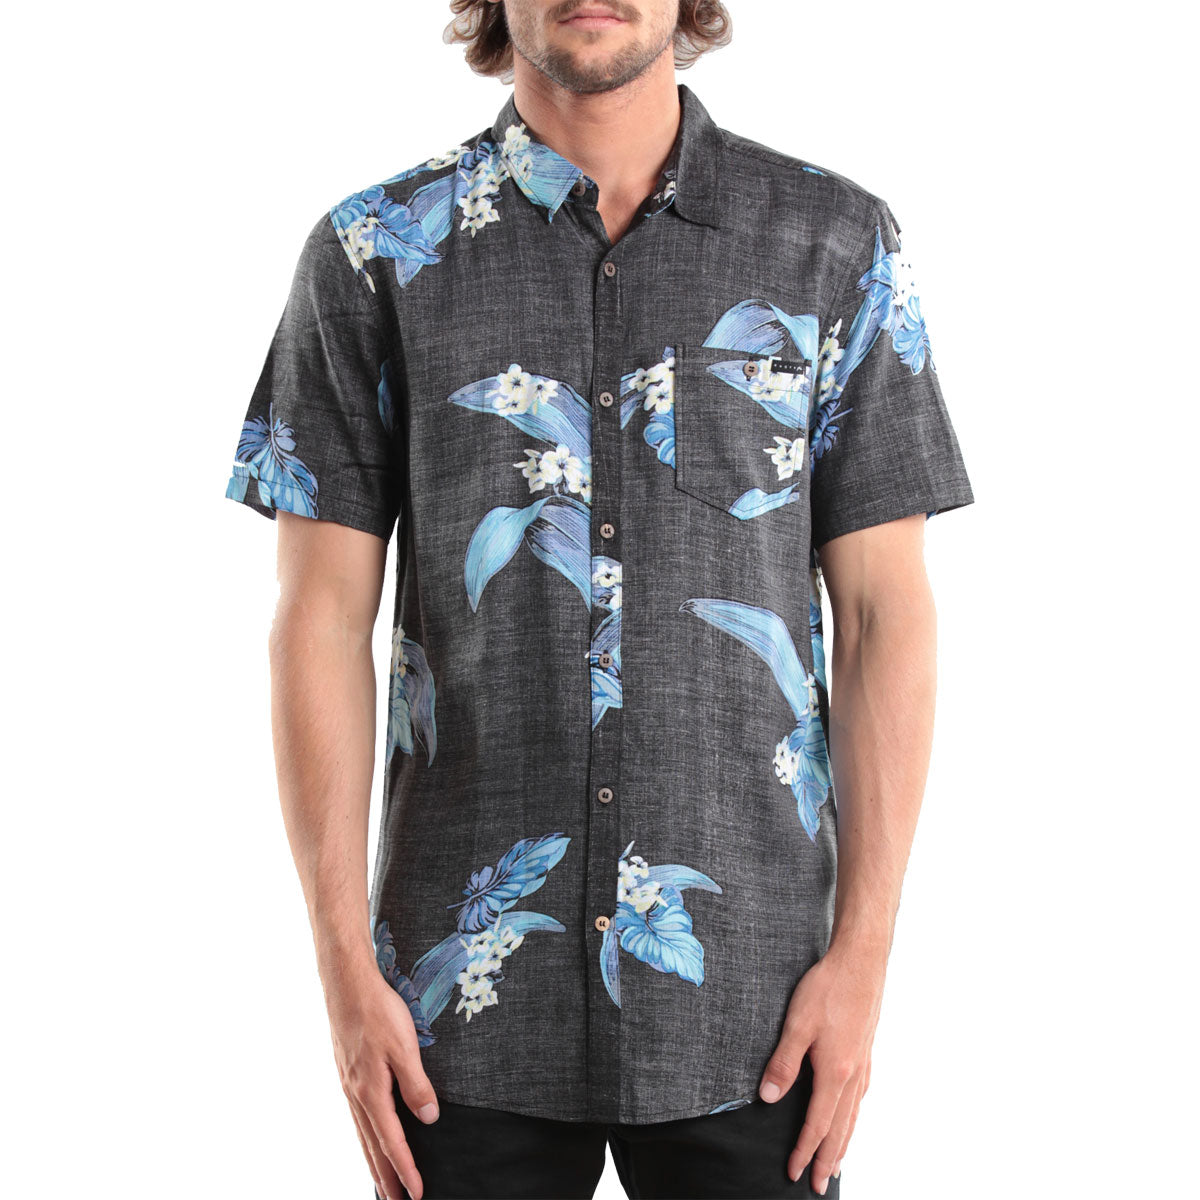 Rusty Melodious Men's Button Up Short-Sleeve Shirts - Miles Blue